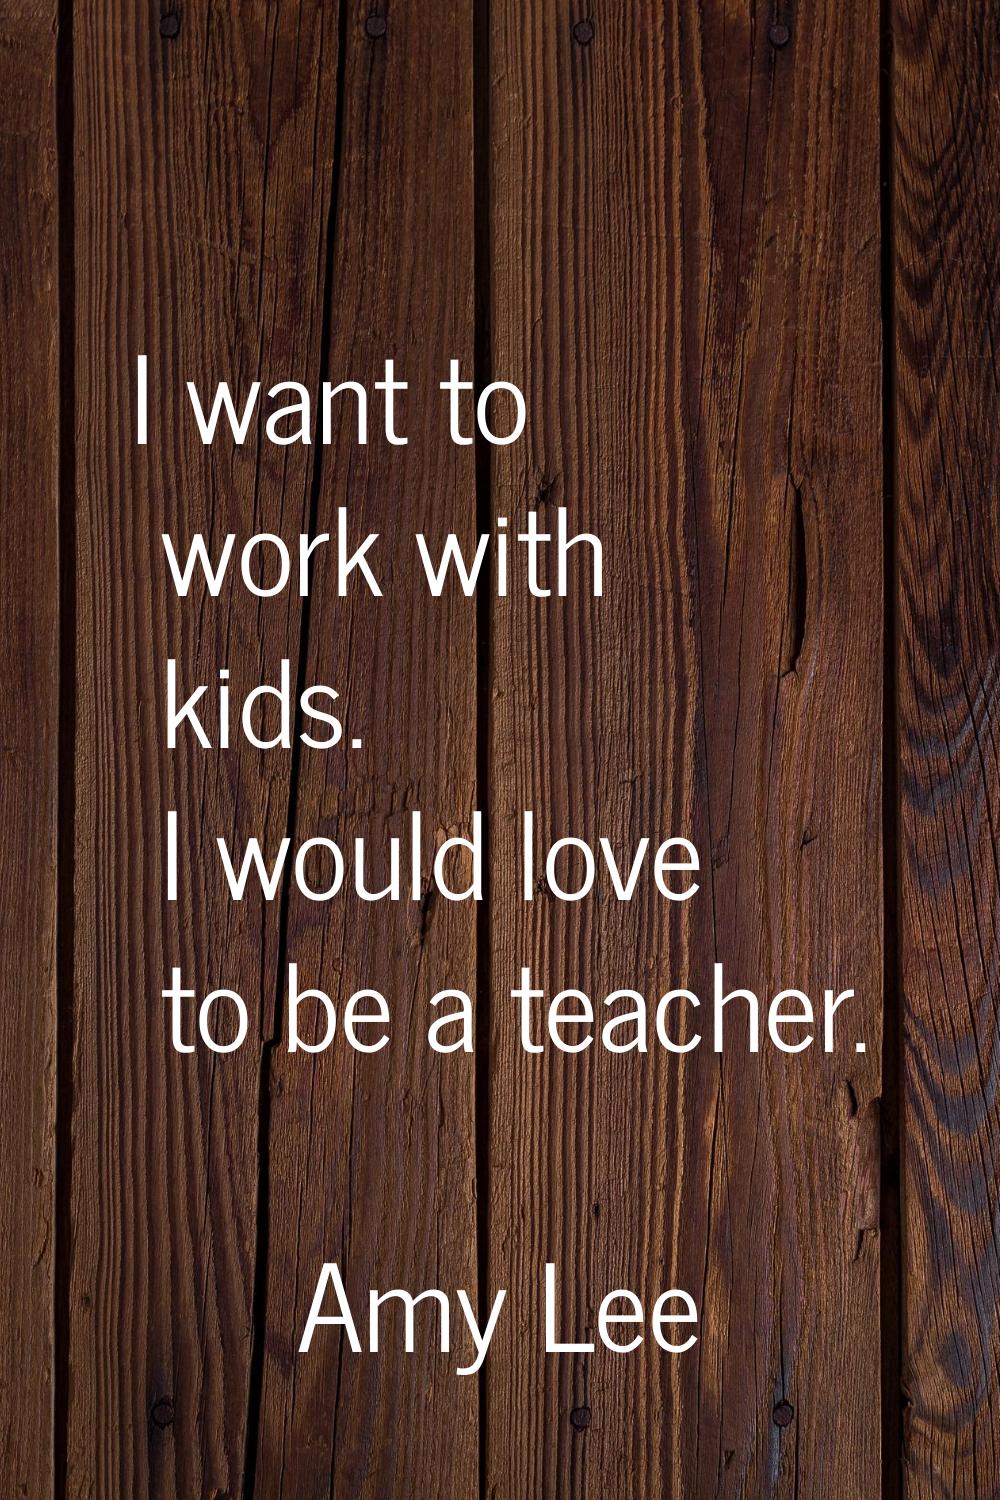 I want to work with kids. I would love to be a teacher.